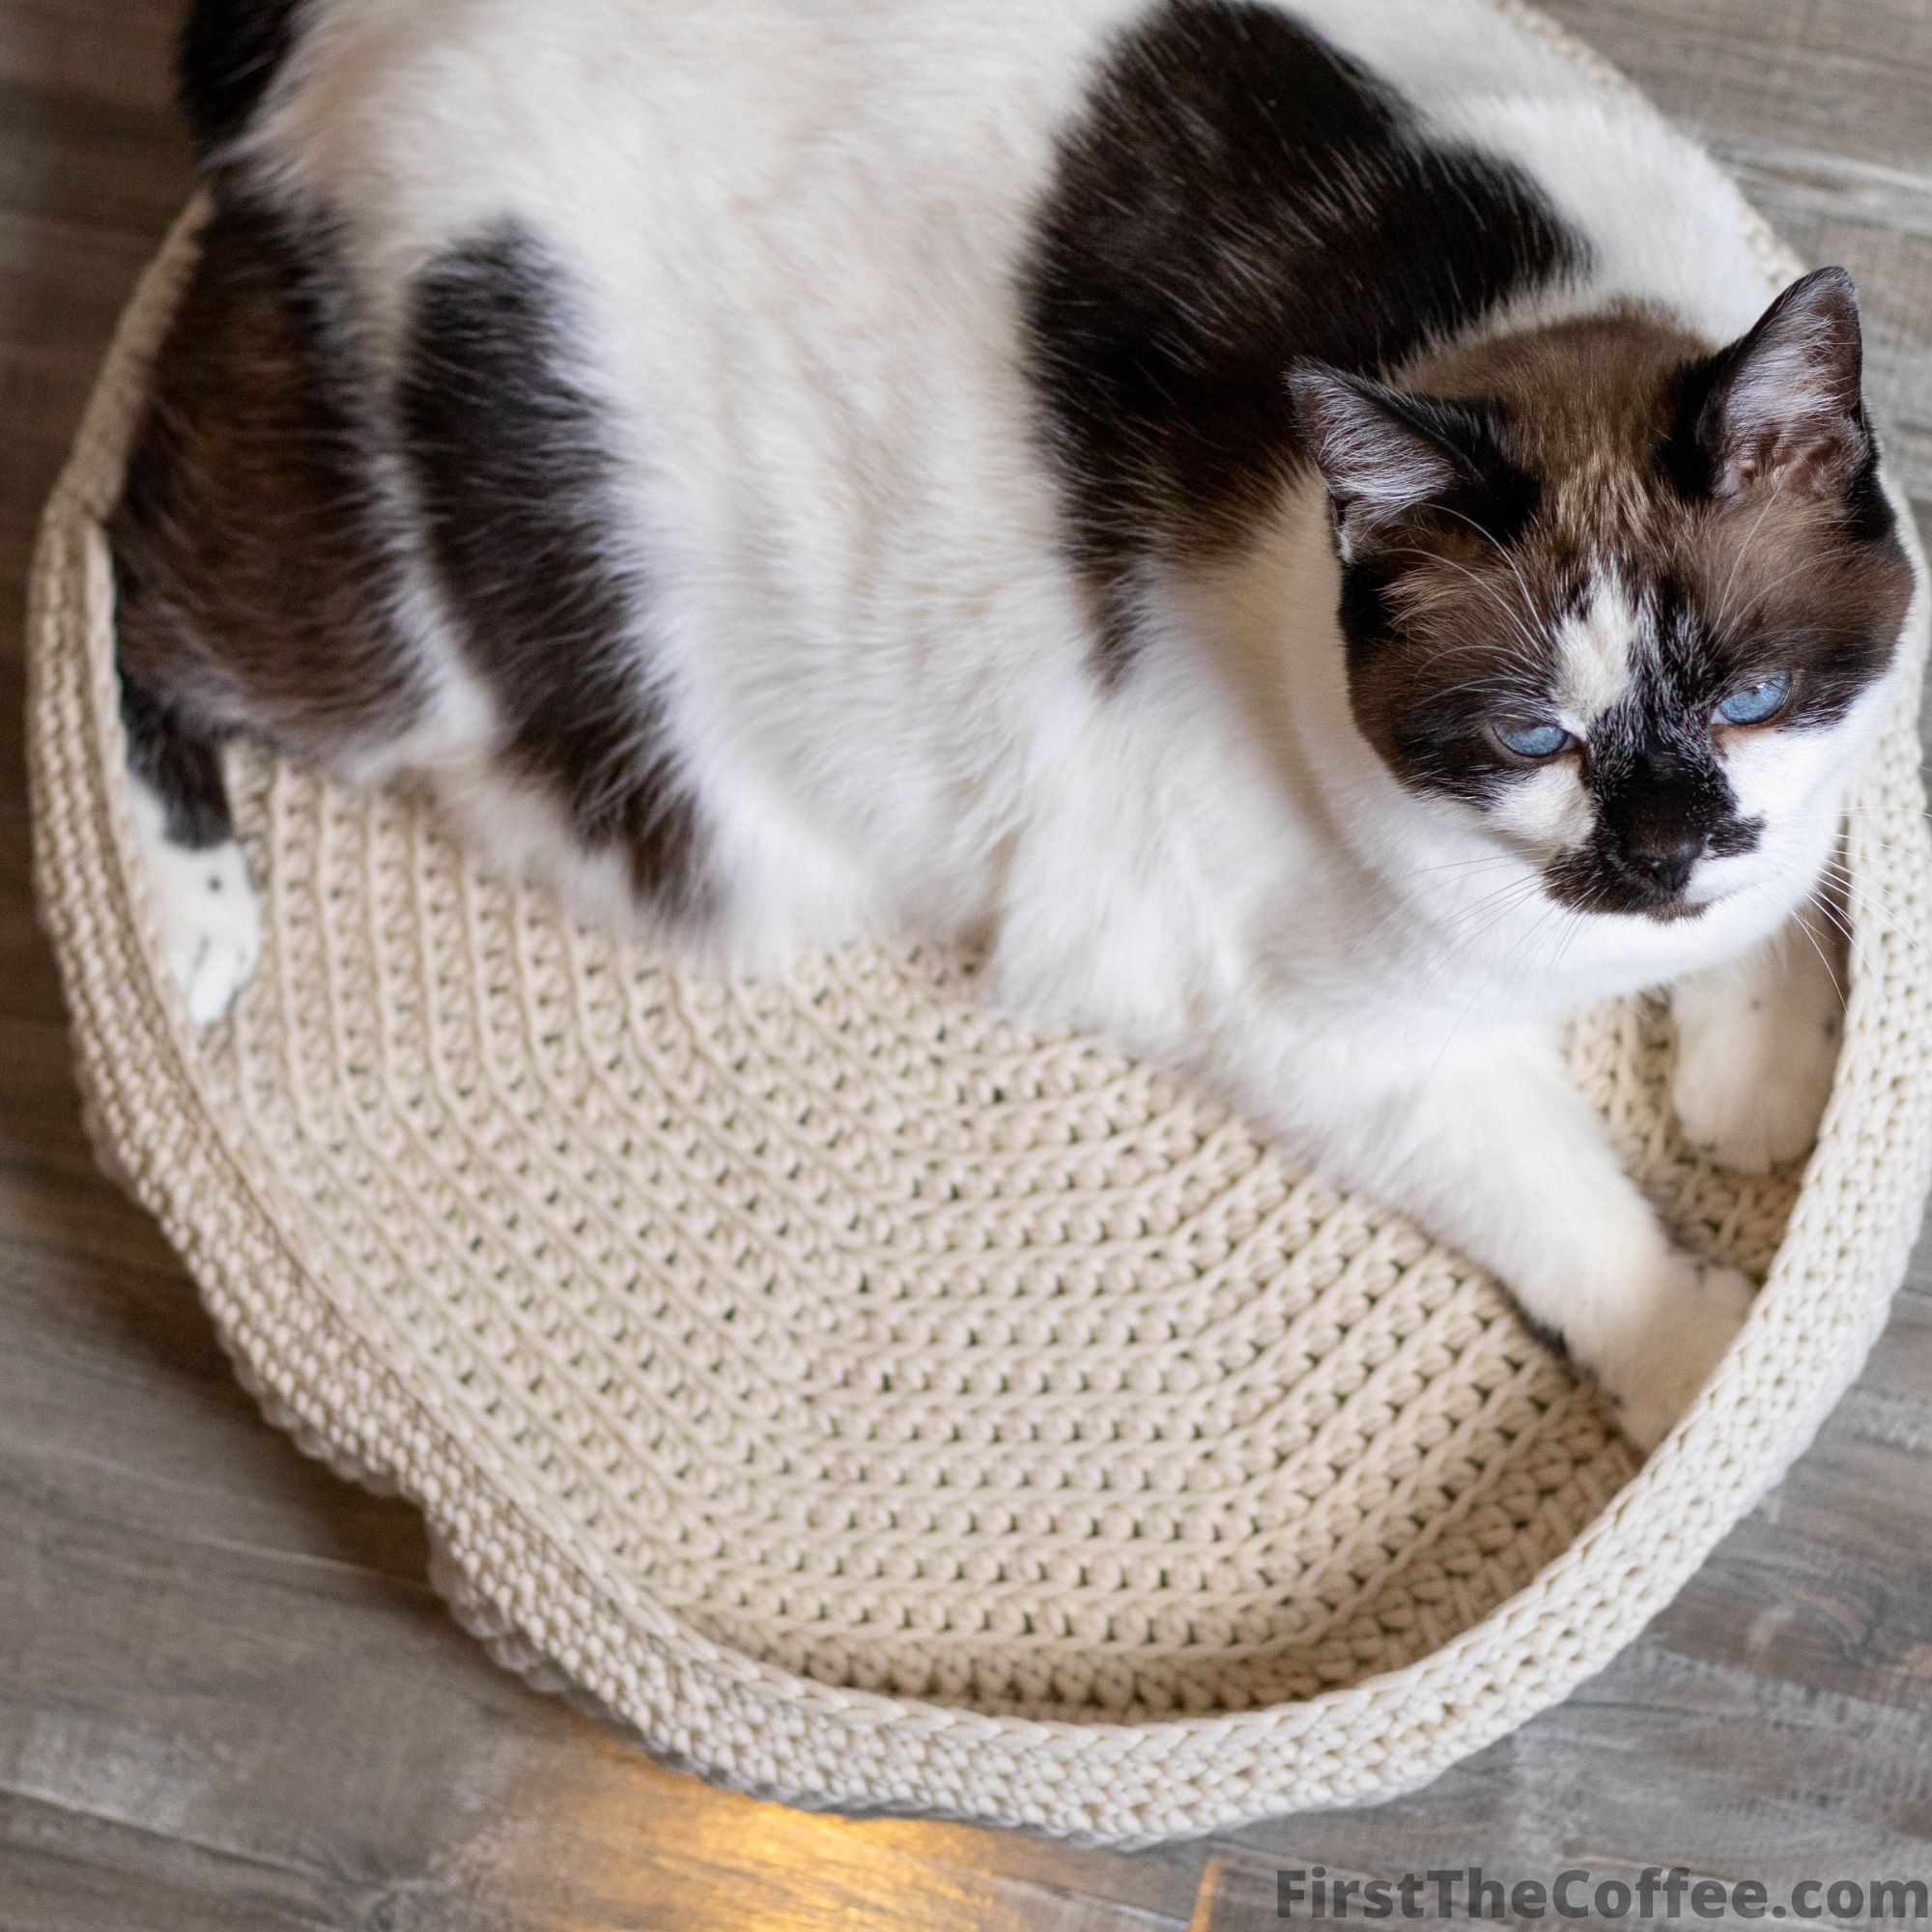 The large size of the Lounging Pet bed with a cat inside only taking up about half the space.